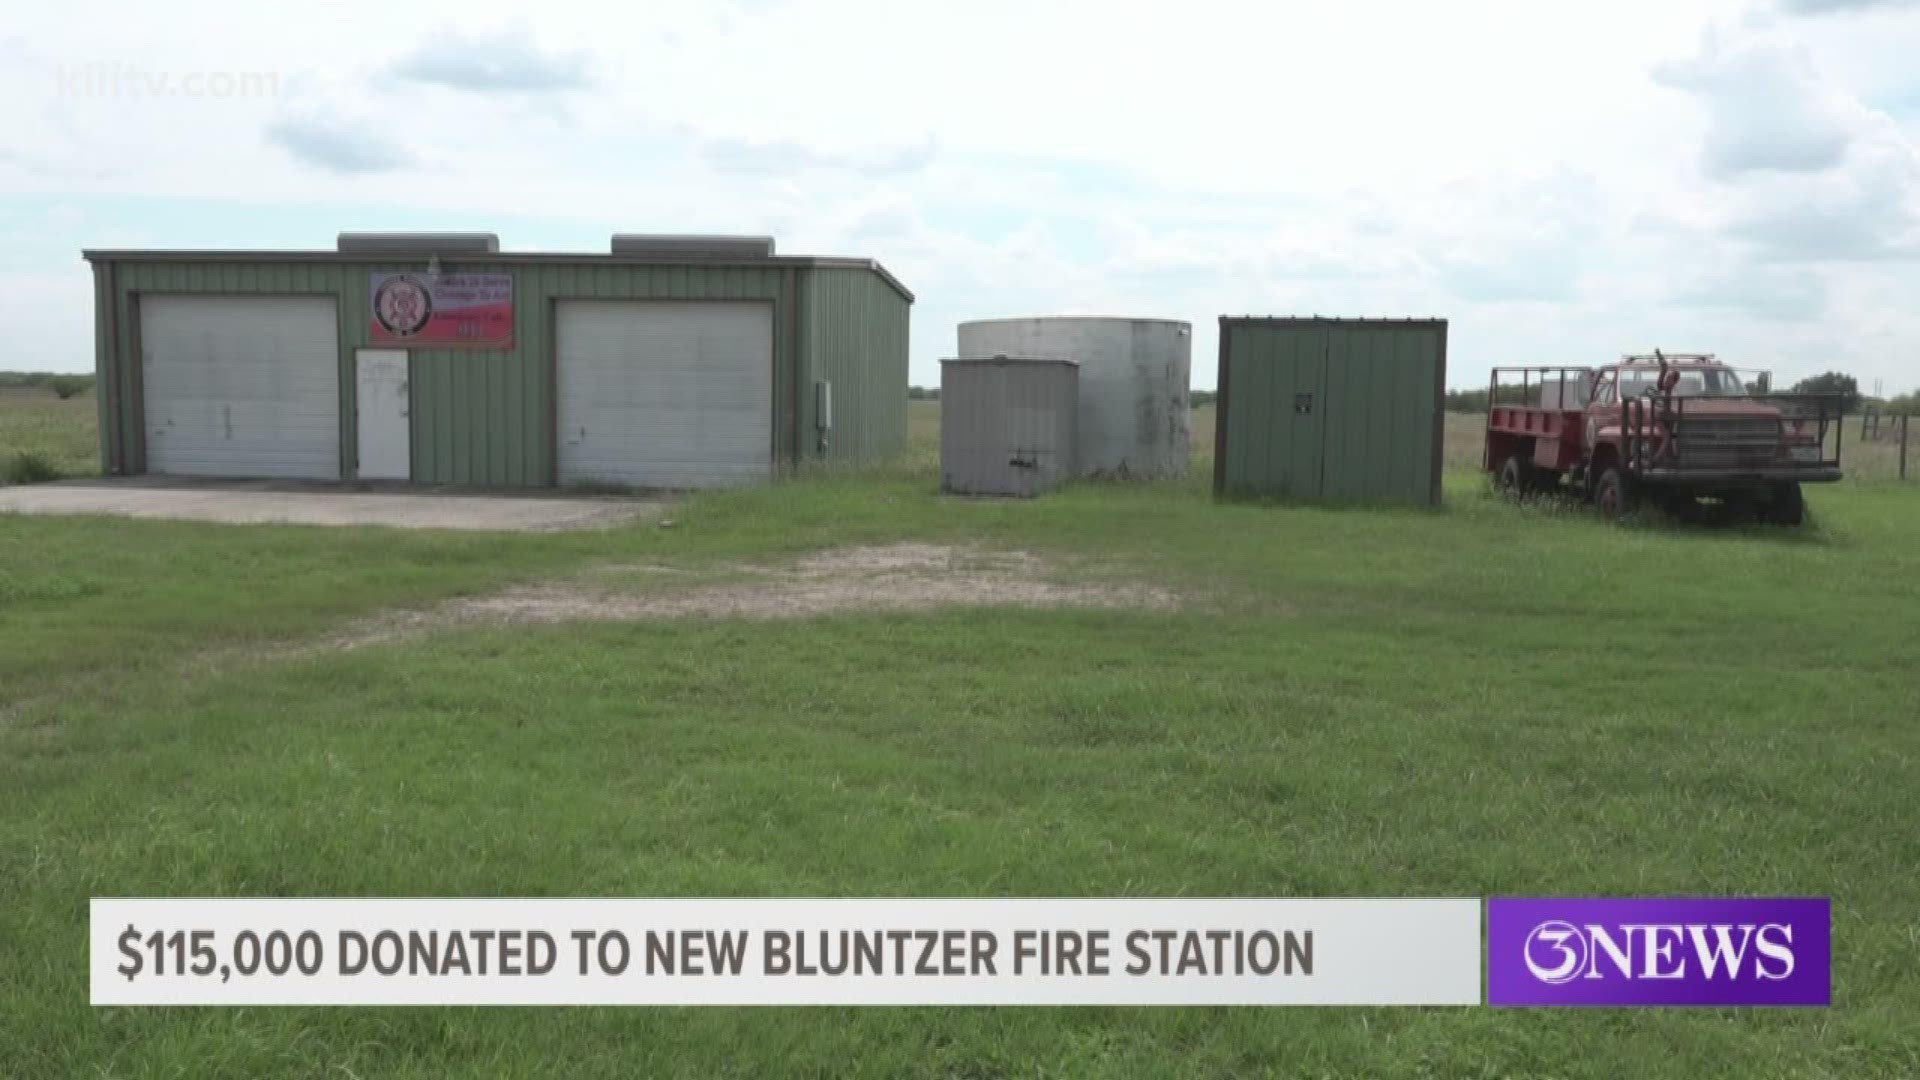 The community of Bluntzer, Texas, just northwest of Corpus Christi, is about to get a new fire station thanks to a generous donation from a well known South Texas ranching family.